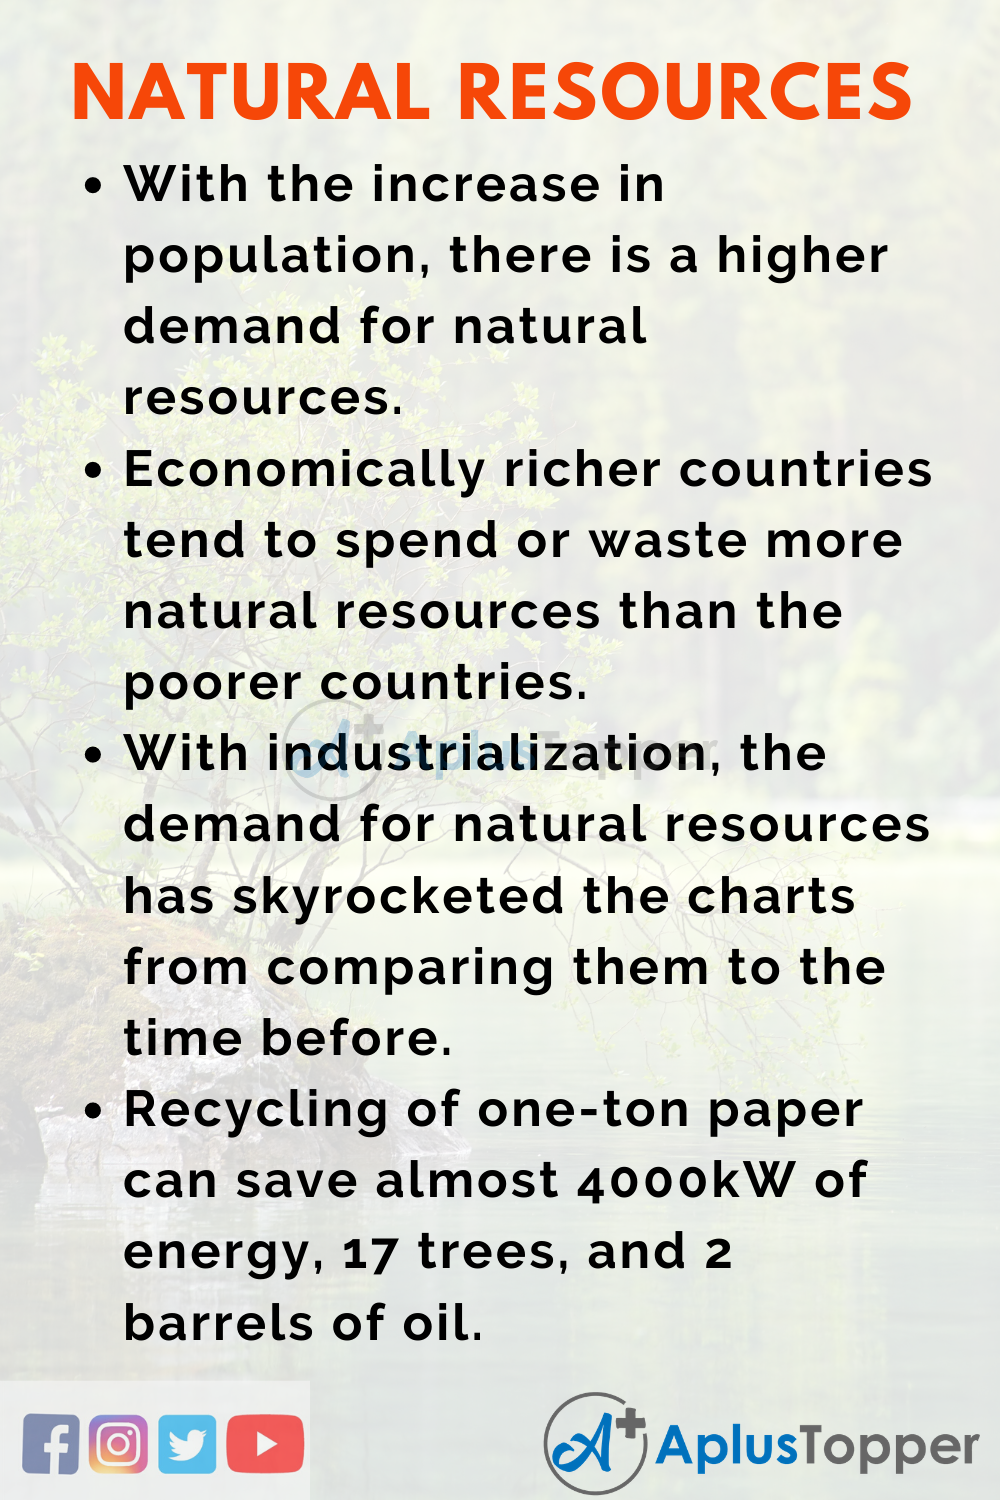 conservation of natural resources essay in 100 words